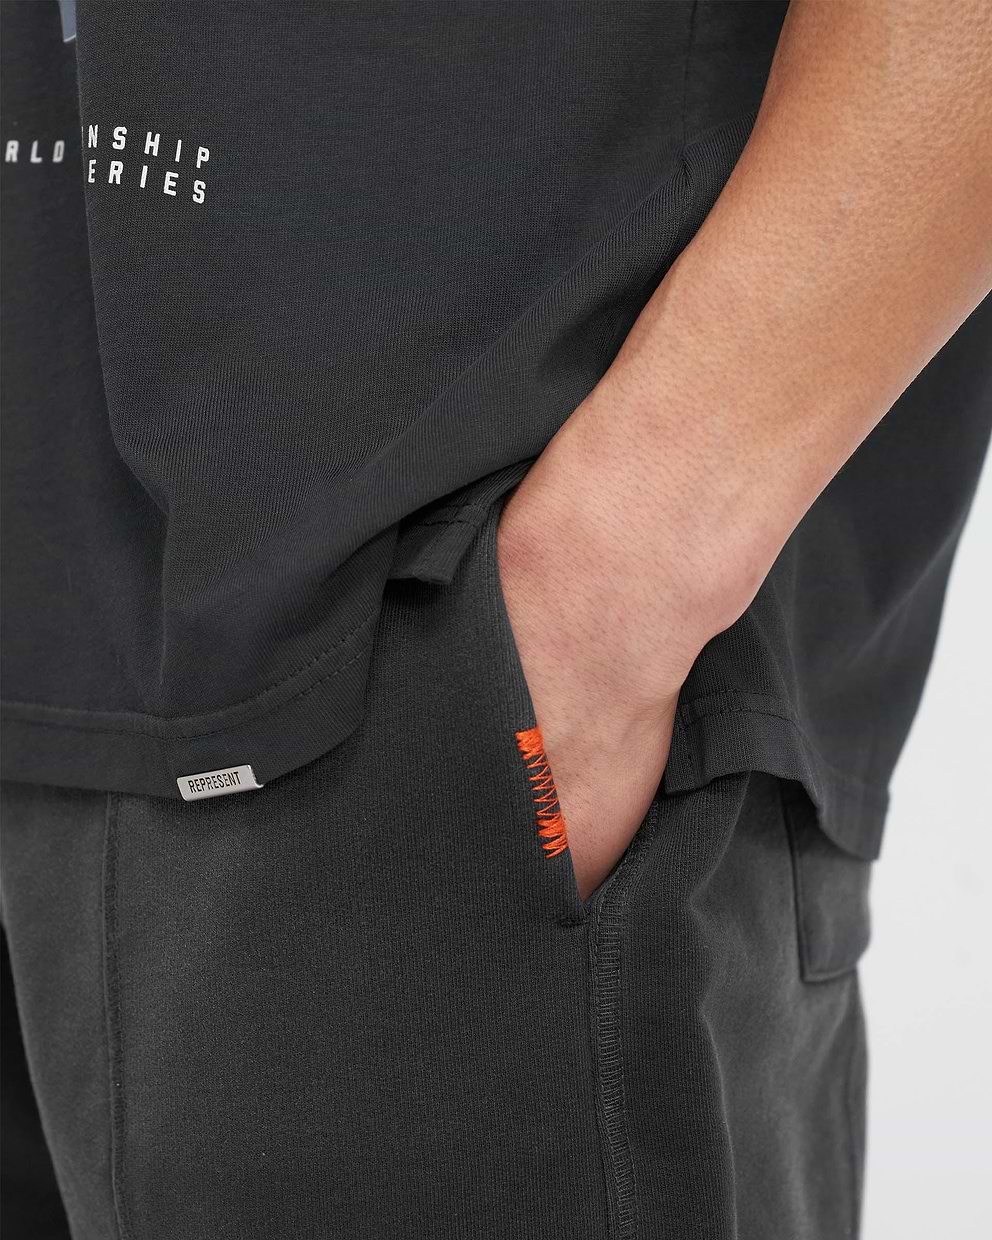 Represent X Feature Step Hem Sweatpants - Stained Black